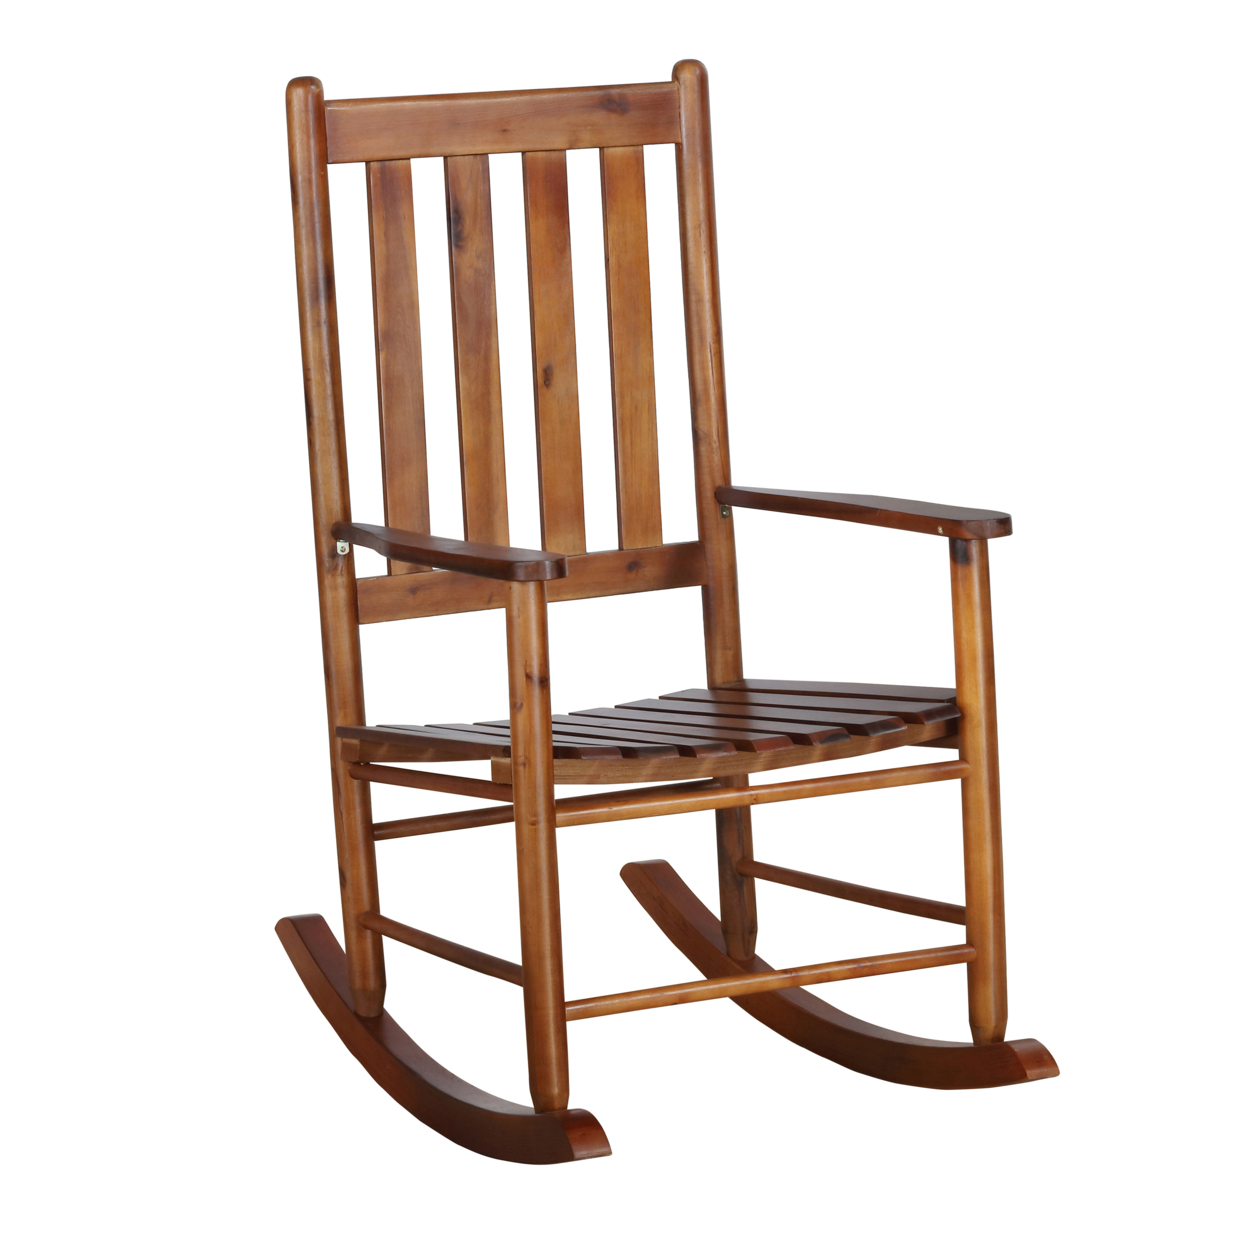 Wooden Rocking Chair With Slat Back And Mission Style, Brown- Saltoro Sherpi